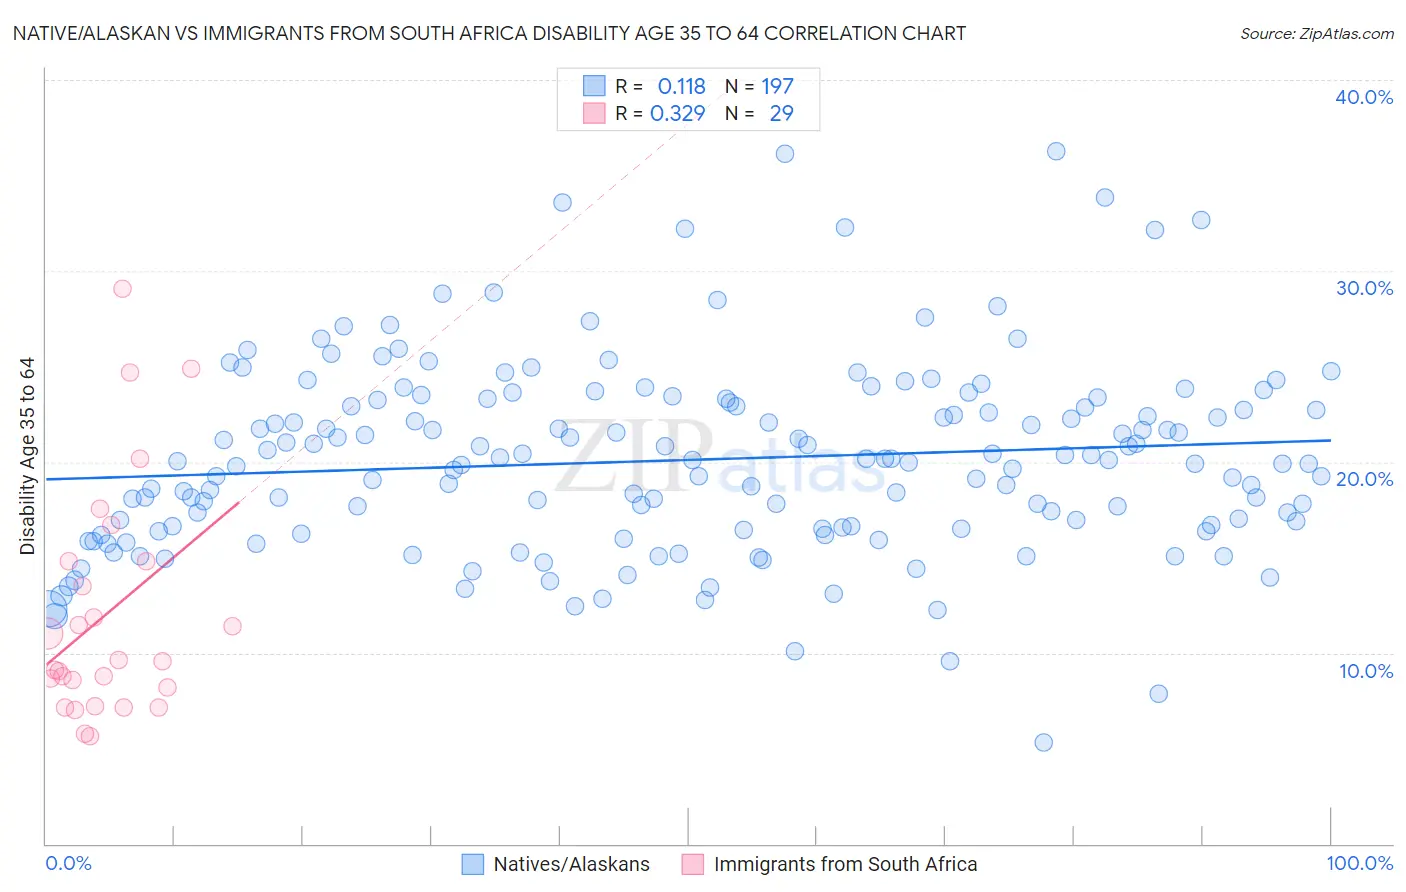 Native/Alaskan vs Immigrants from South Africa Disability Age 35 to 64